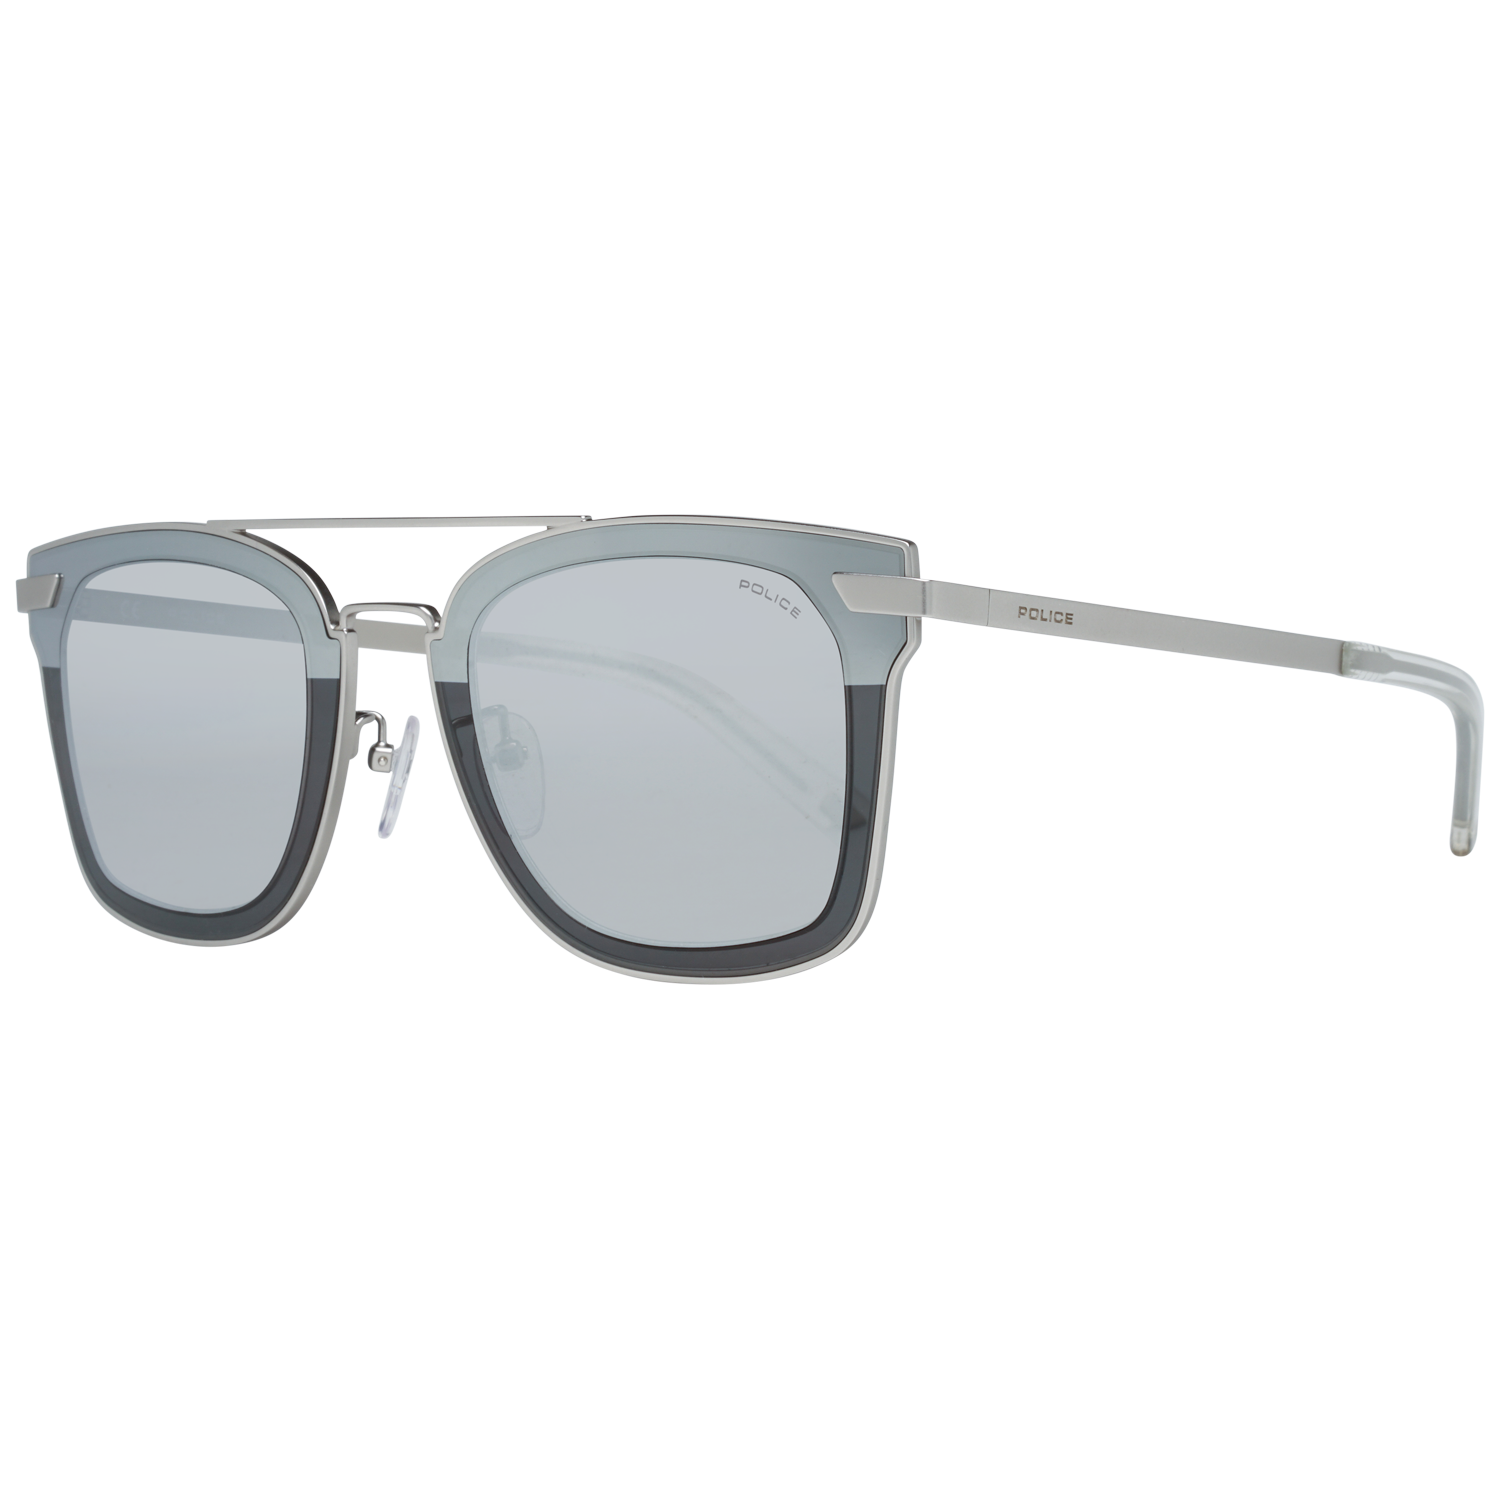 Police Sunglasses SPL348 581X 49 Men
Frame color: Silver
Lenses color: Silver
Lenses material: Plastic
Filter category: 3
Style: Square
Lenses effect: Mirrored
Protection: 100% UVA & UVB
Lenses width: 49
Lenses height: 42
Bridge width: 24
Frame width: 143
Temples length: 145
Shipment includes: Case, cleaning cloth
Spring hinge: No